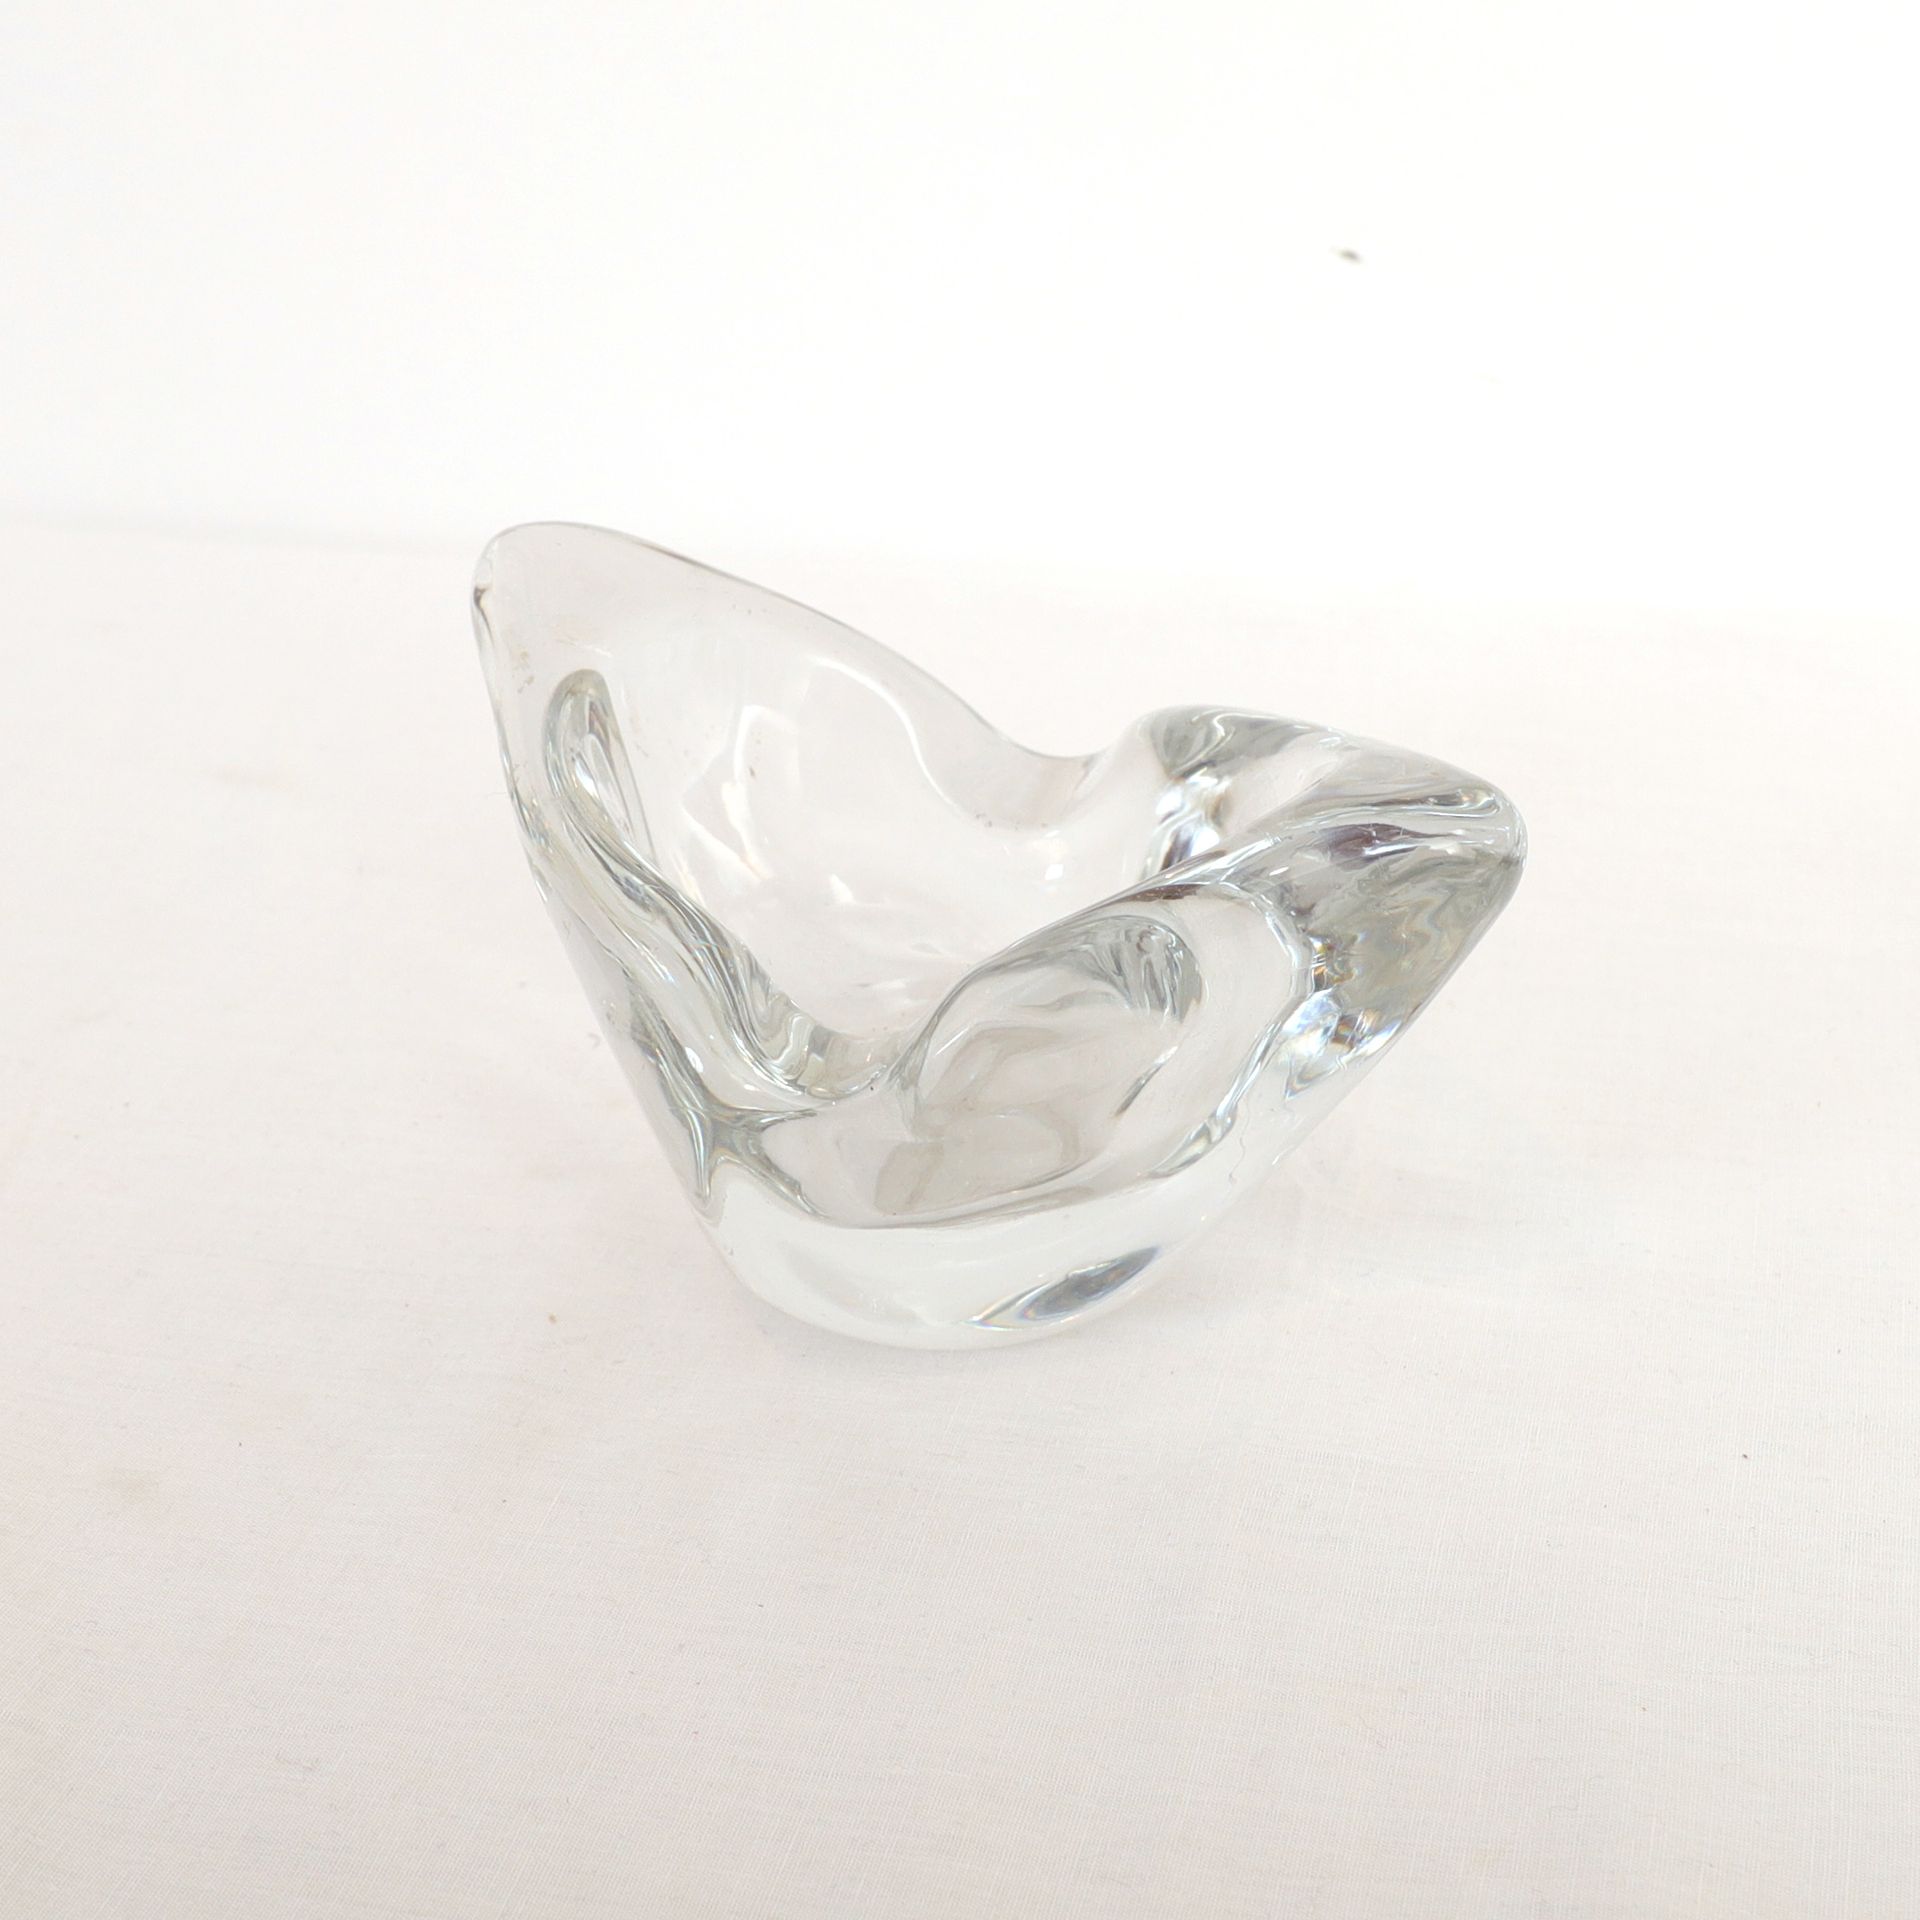 Null LARGE CRYSTAL ASHTRAY WITH TWO BUCKS 20th century

Signed at the point belo&hellip;